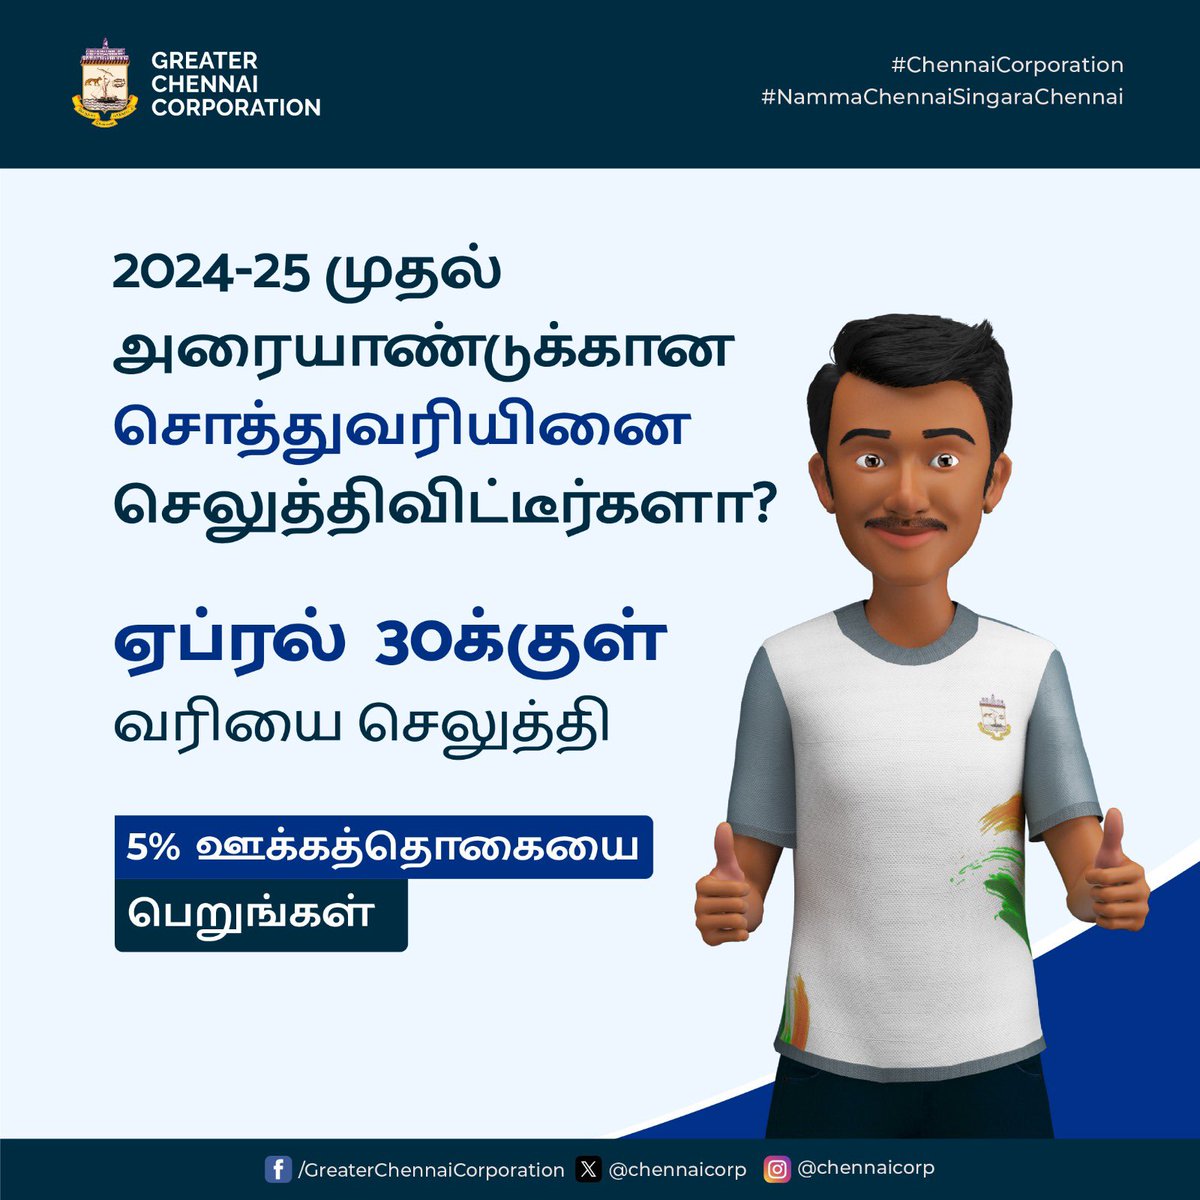 Dear #Chennaiites,

Be a part of #Chennai's development by promptly paying your property tax!
Get a 5% incentive on paying your property tax for the 1st half year of 2024-25.
Click here to pay your property tax
chennaicorporation.gov.in/gcc/online-pay…

#ChennaiCorporation
#HeretoServe